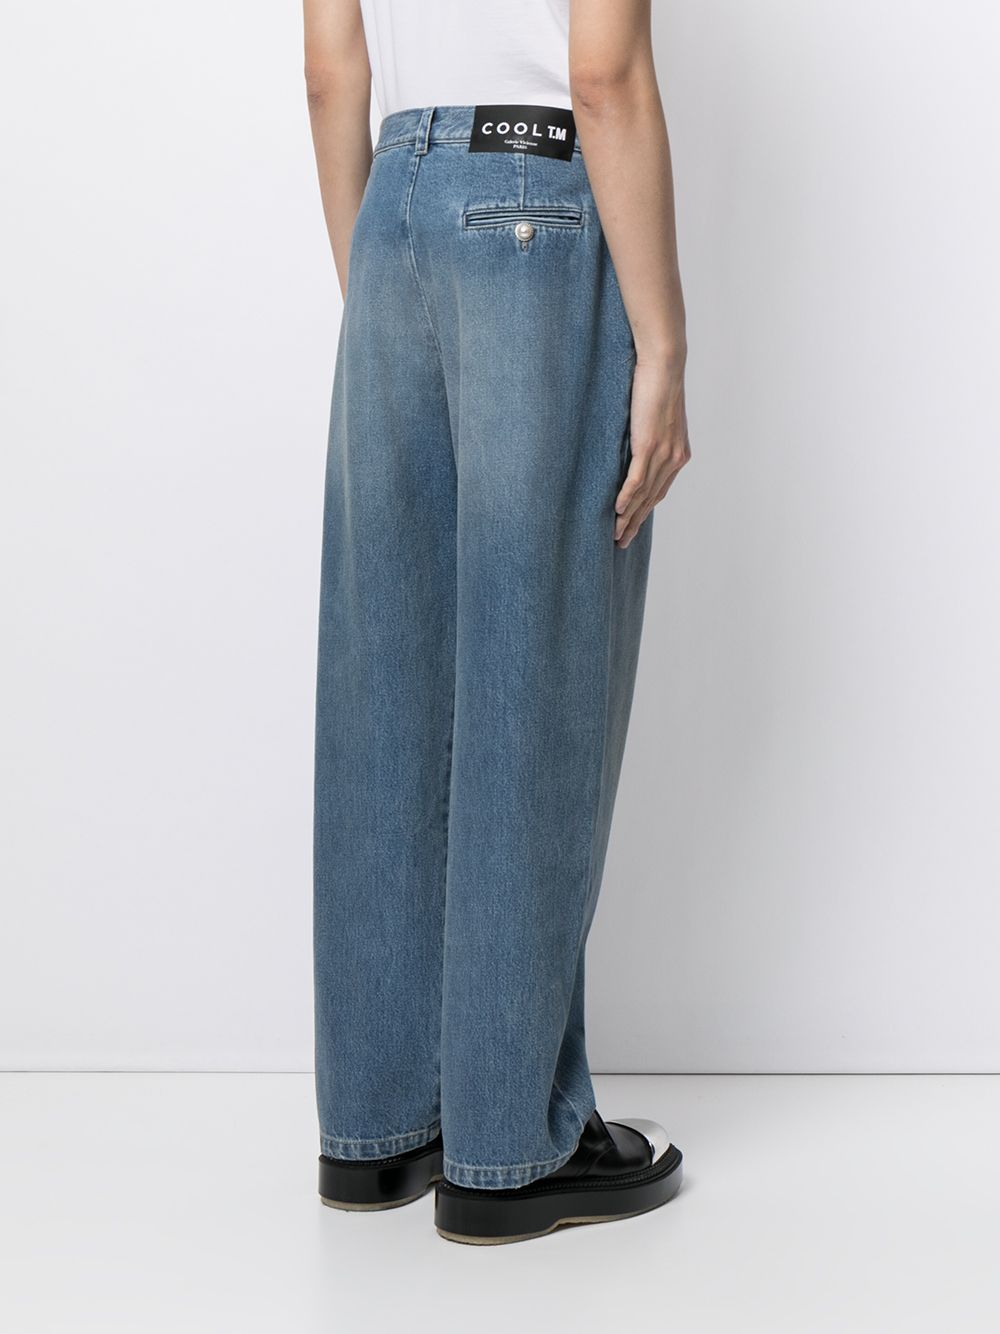 Shop COOL T.M toy-embellished loose jeans with Express Delivery - FARFETCH